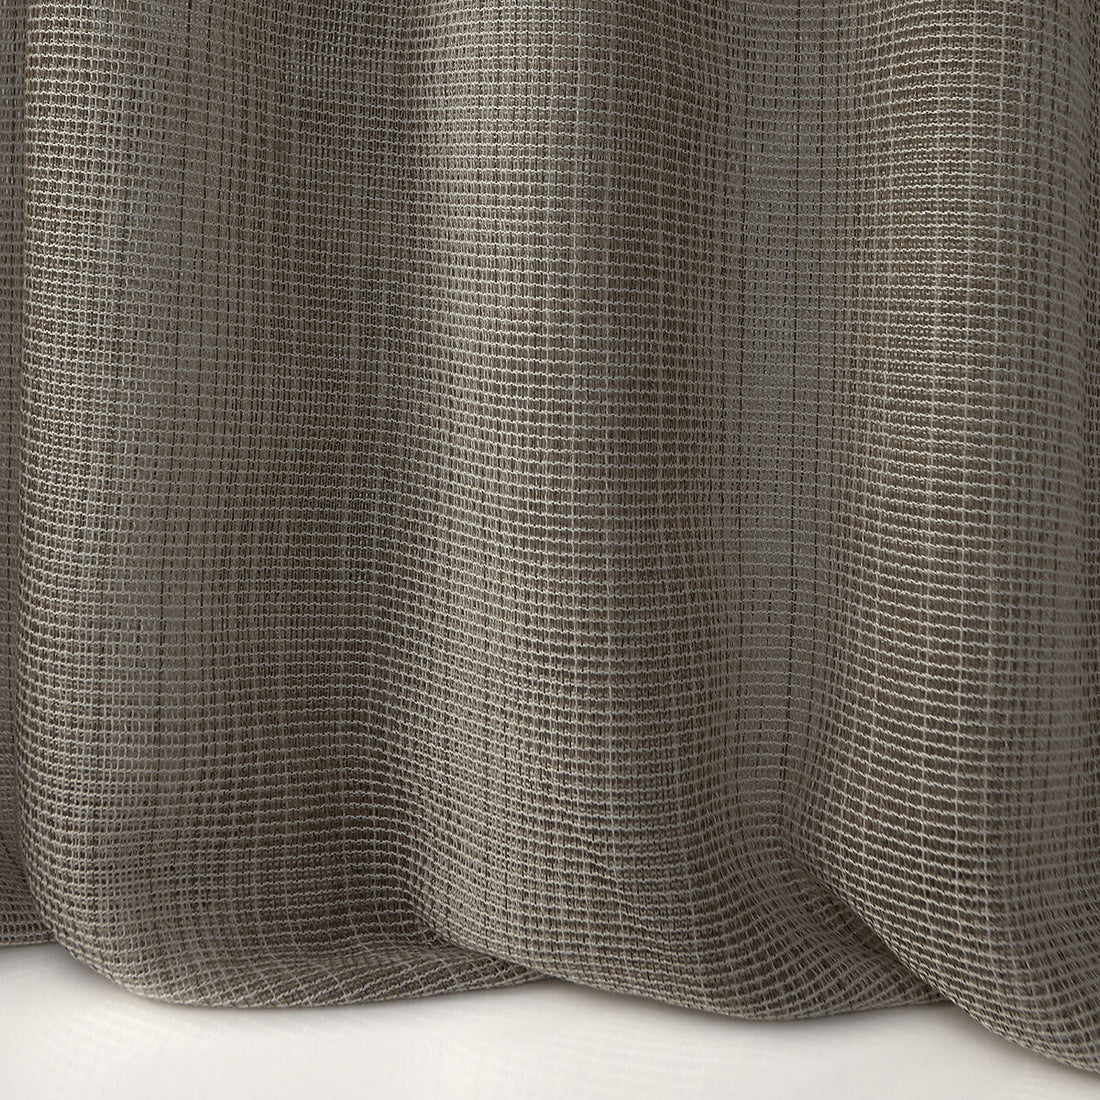 Aalto fabric in 1 color - pattern LZ-30337.01.0 - by Kravet Design in the Lizzo collection